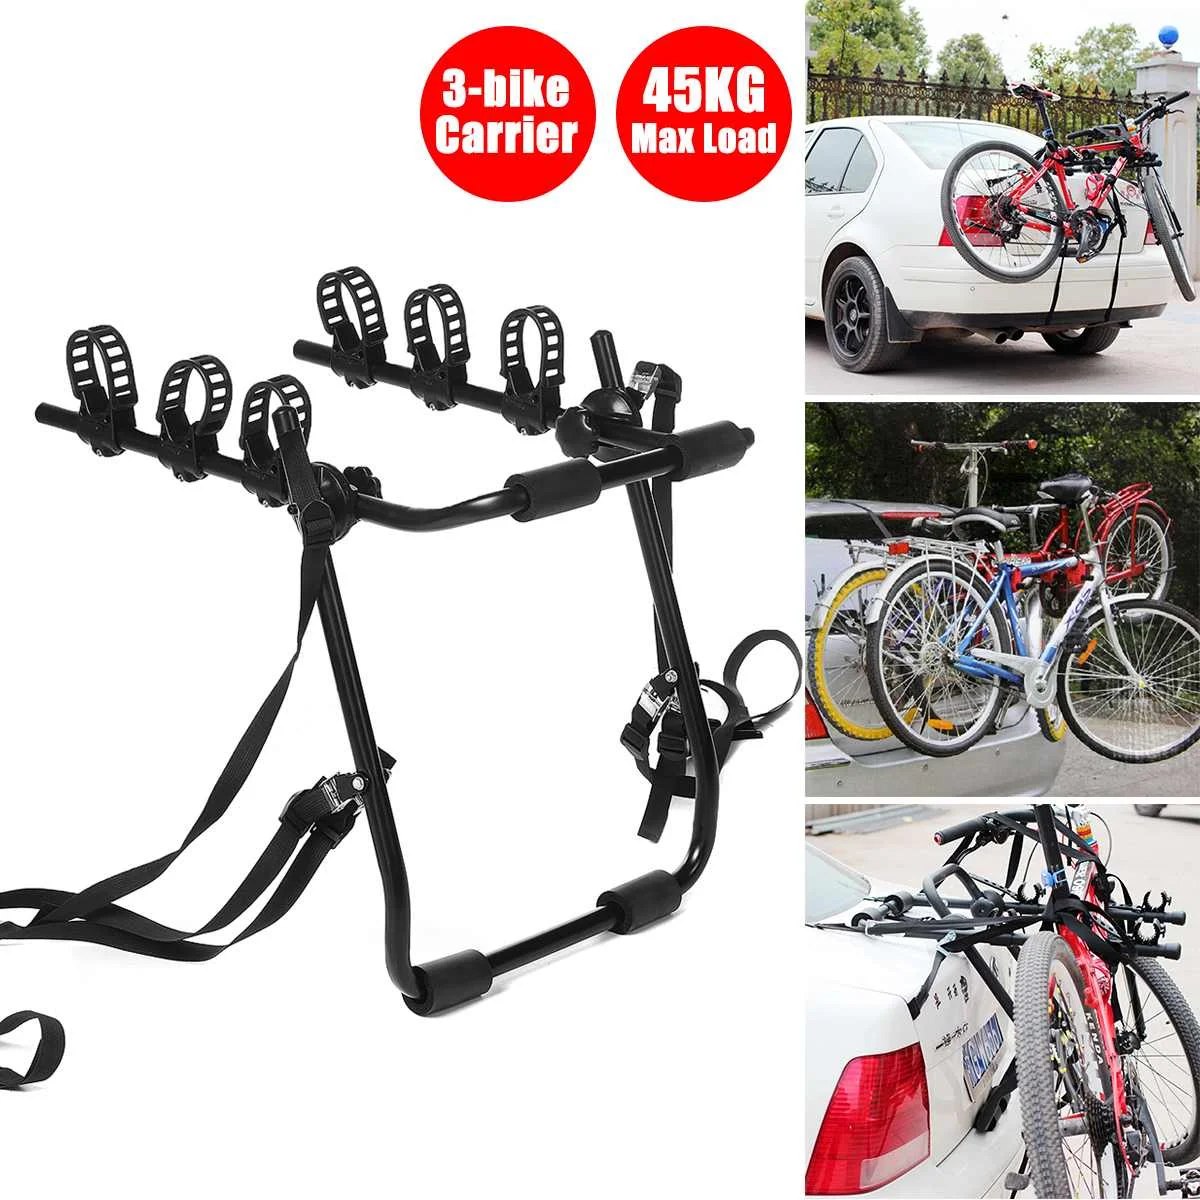 

3 Bike Car Universal Carrier Rack Bicycle Mount Rear Racks Cycling Stand Quick Installation Storage Carrier For Car SUV Trunk